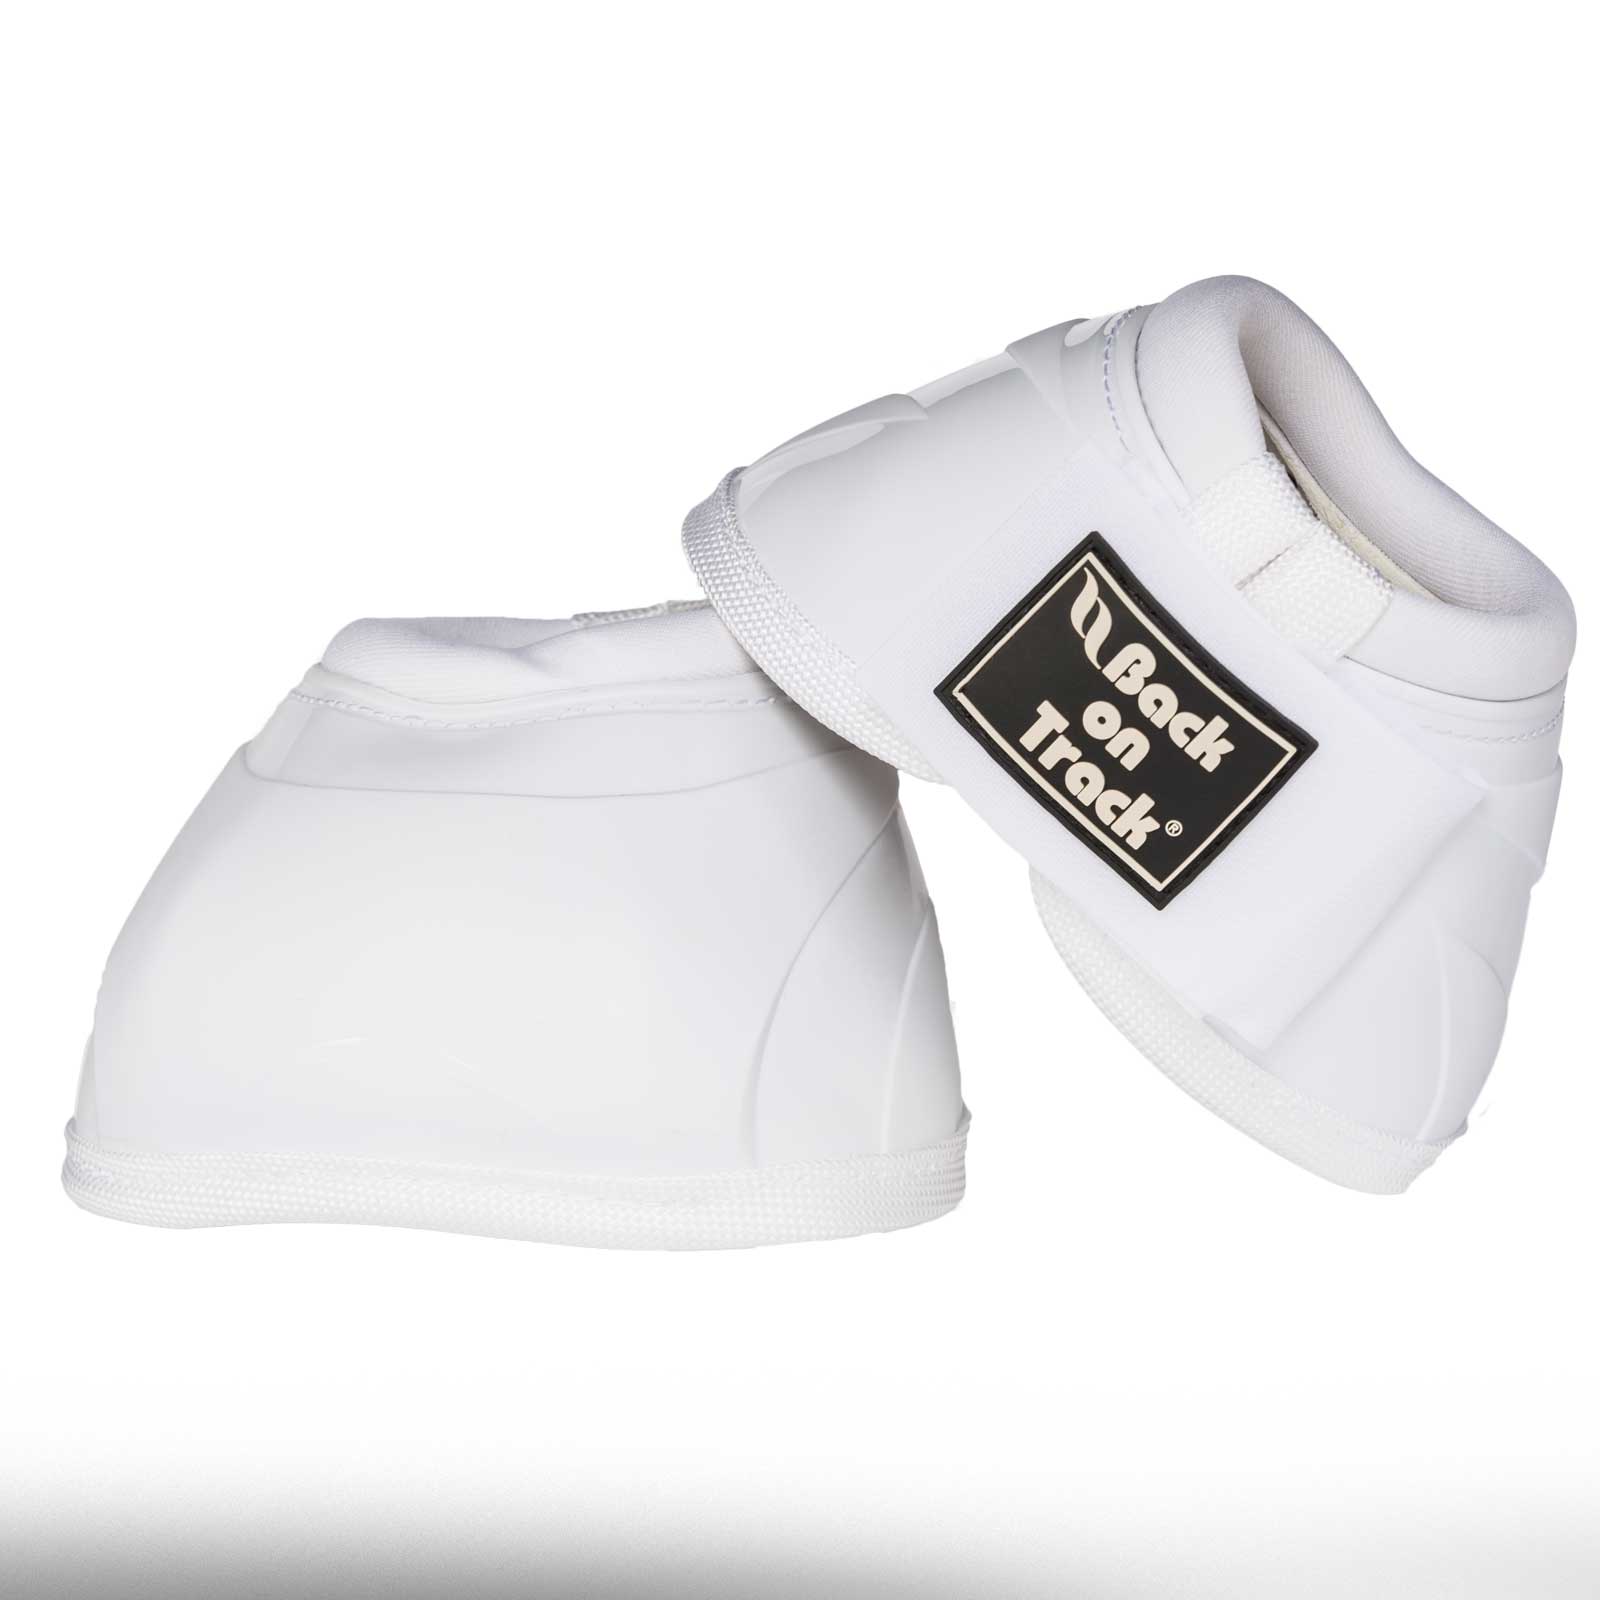 Royal Bell Boots Performance white XL